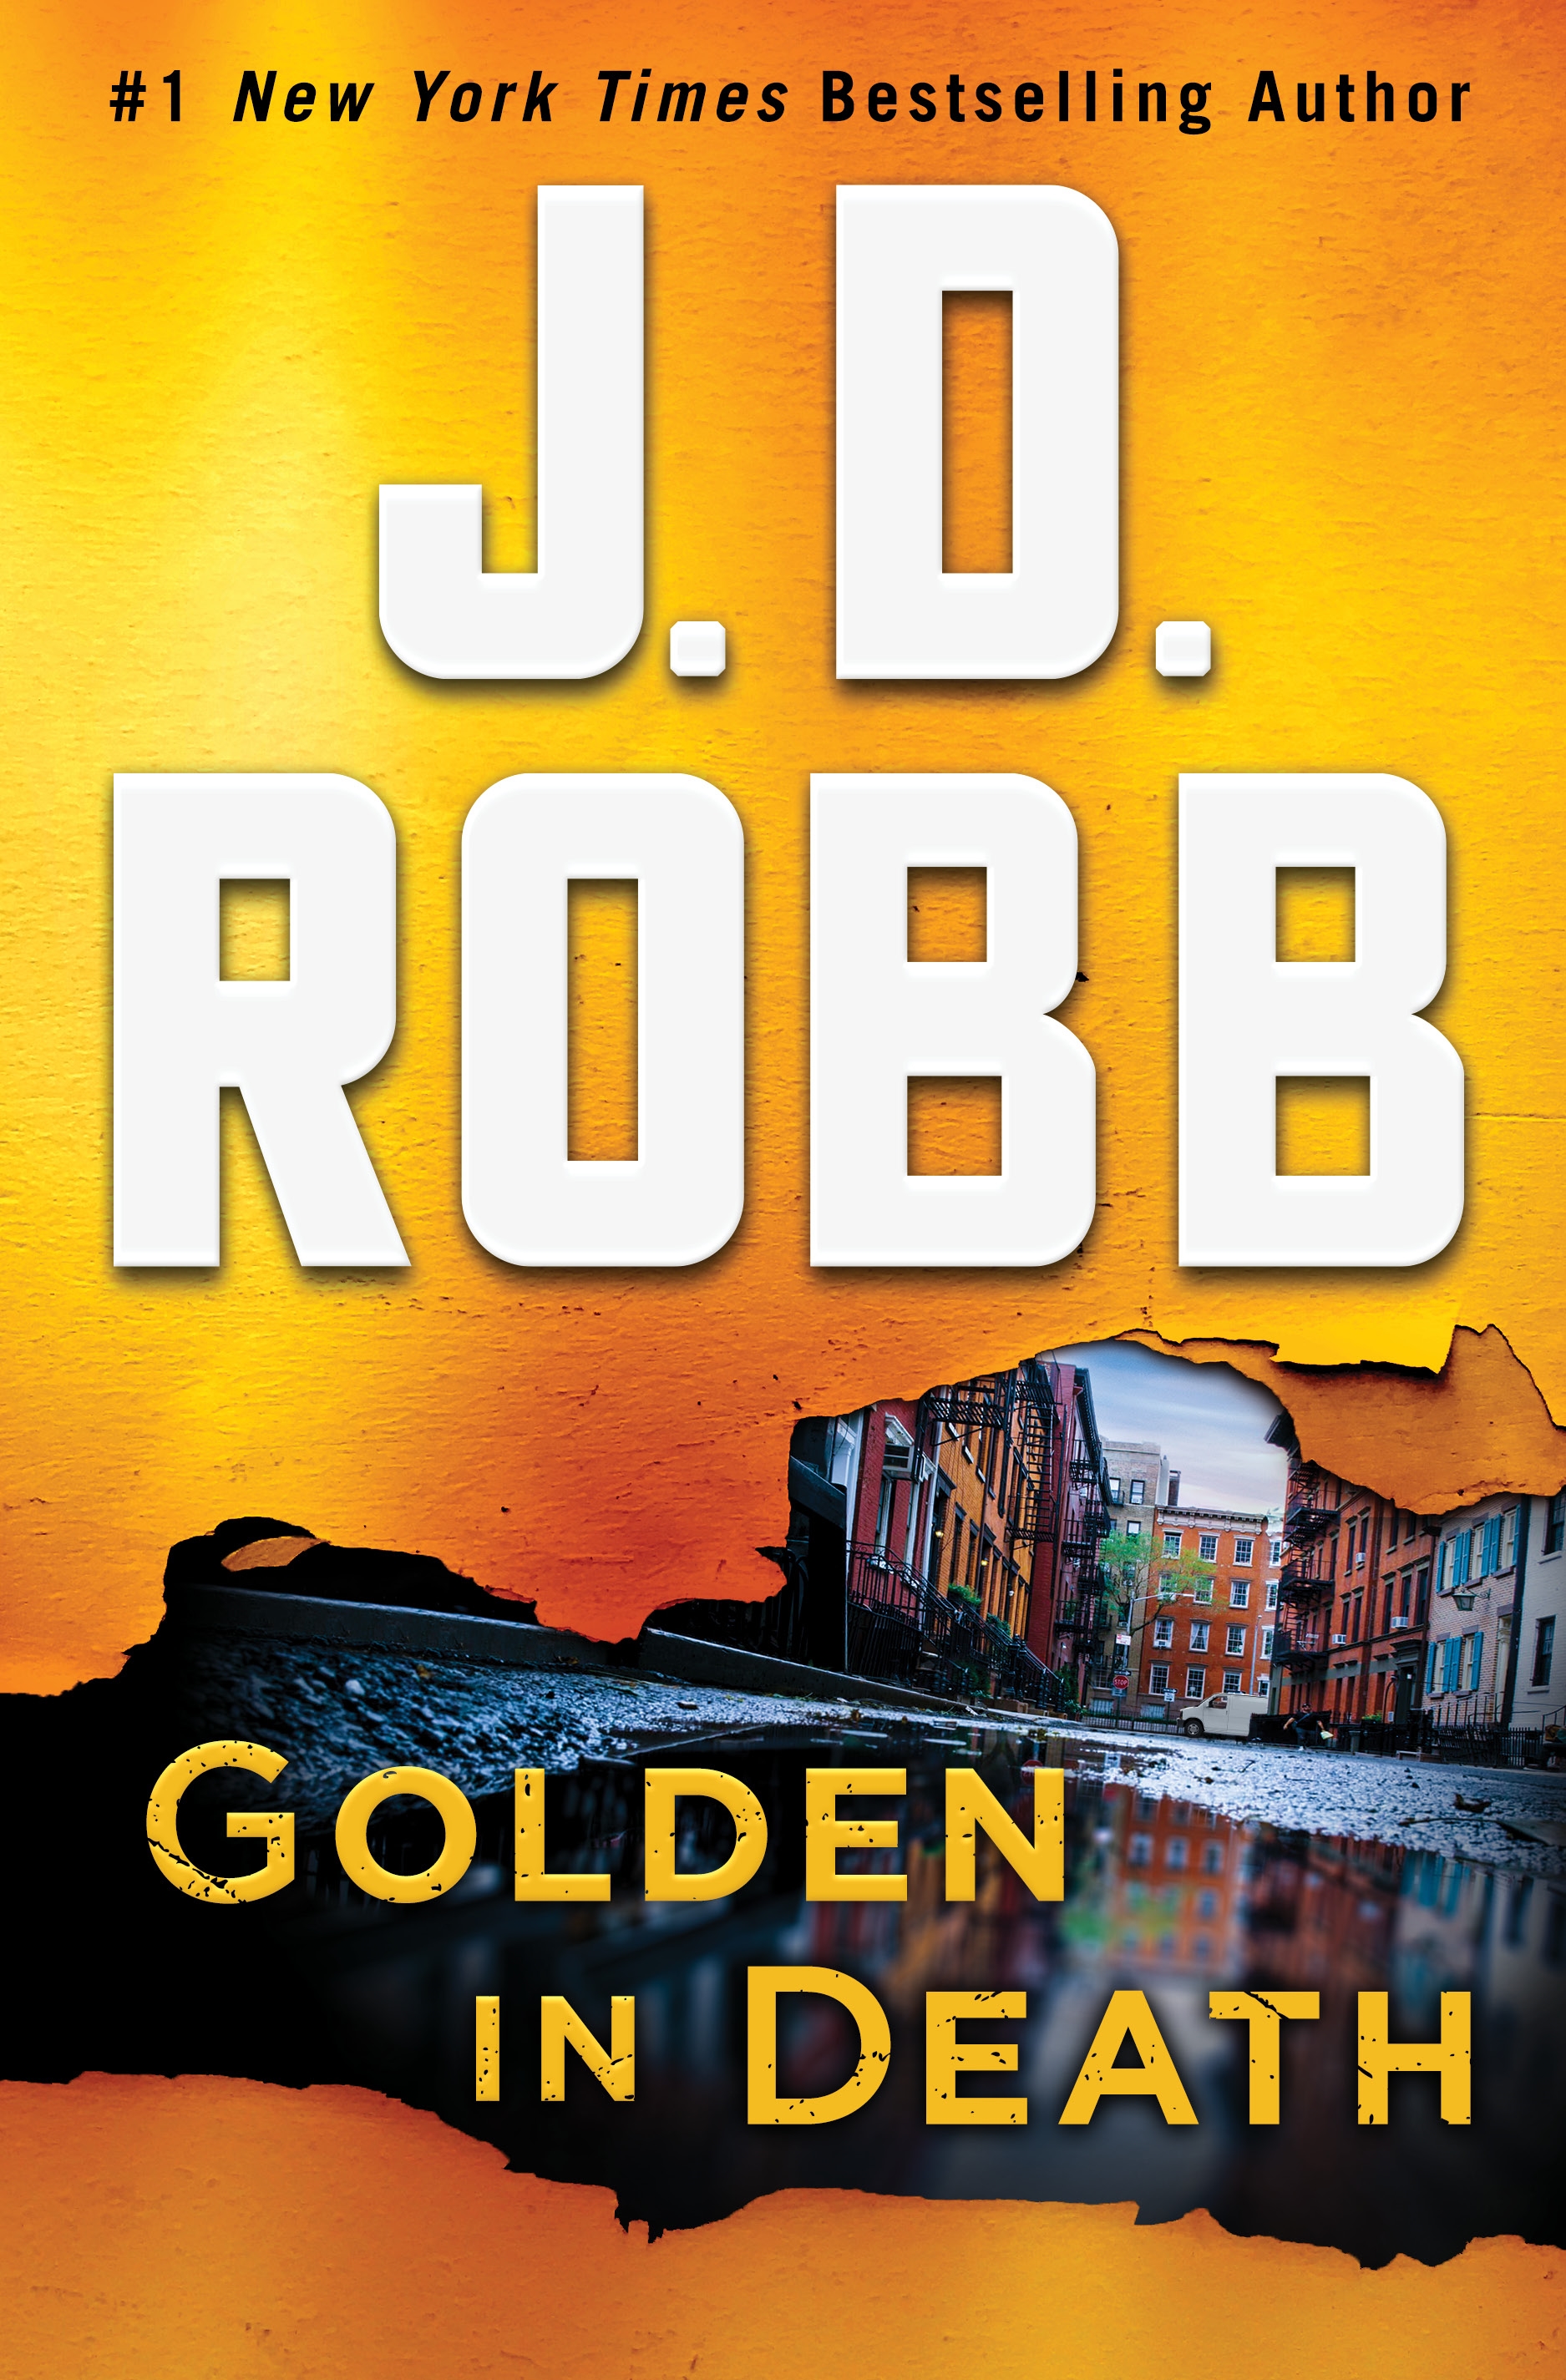 Golden in death cover image